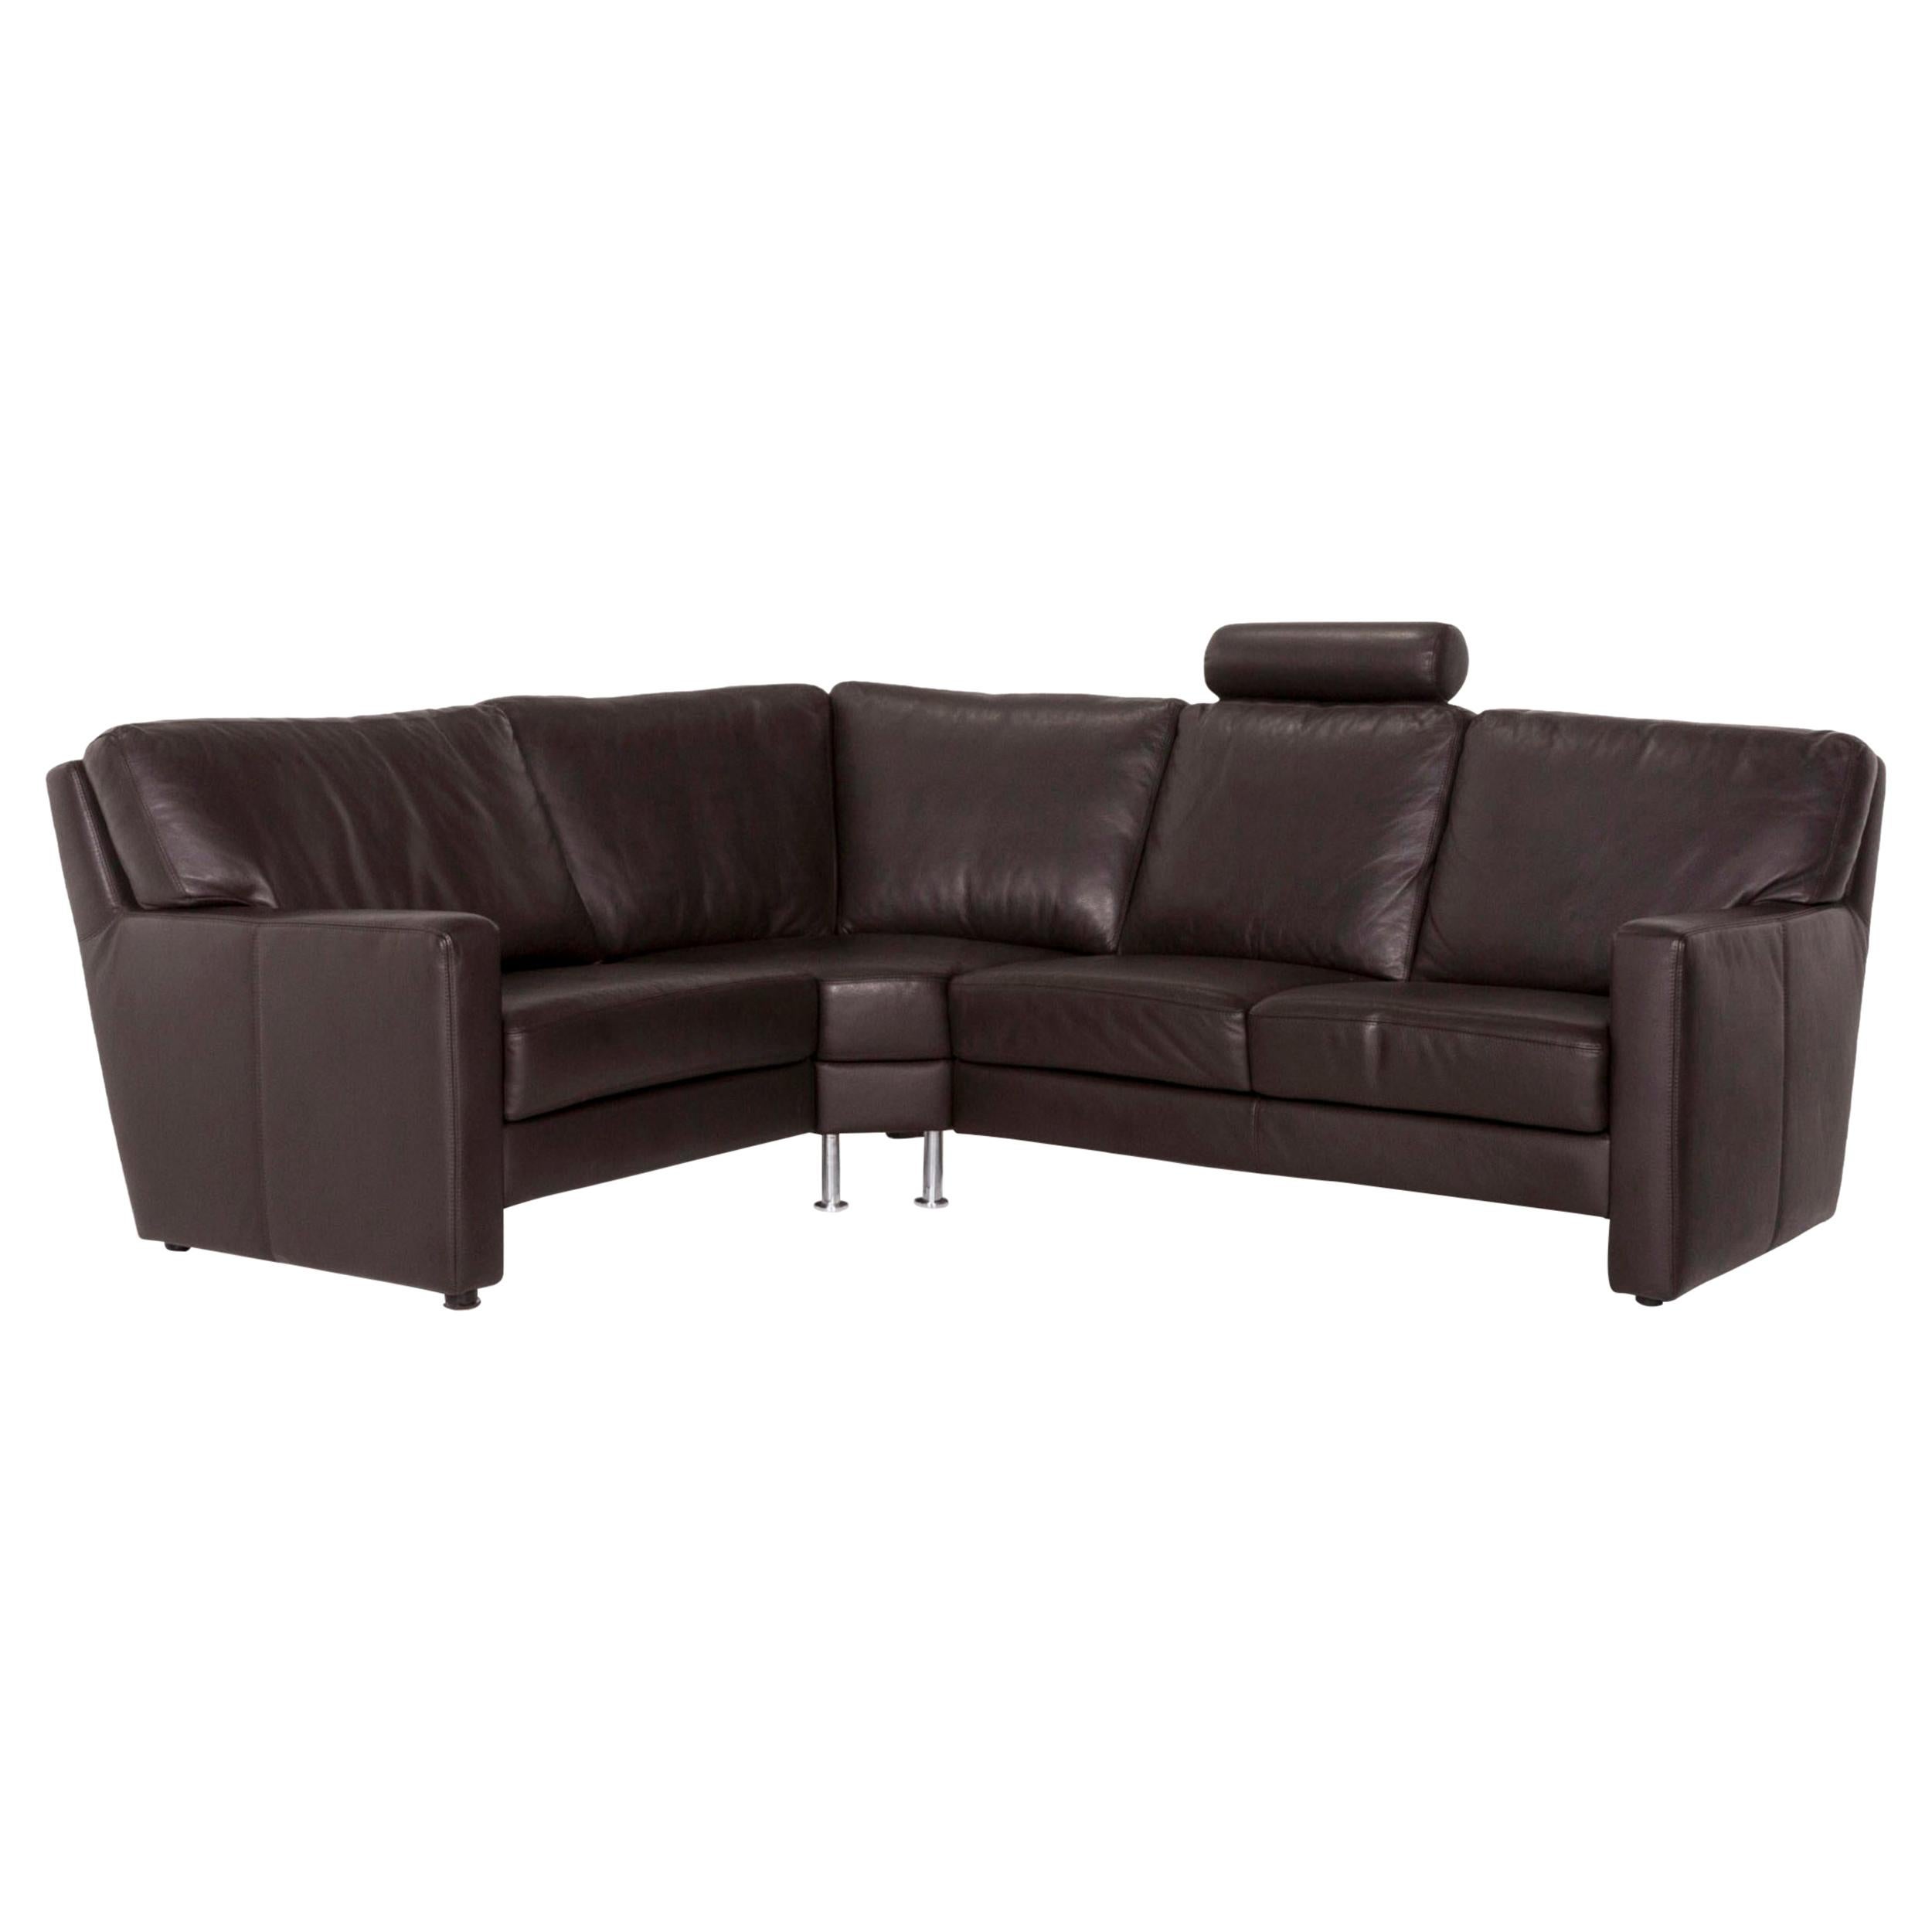 Sample Ring Leather Corner Sofa Brown Dark Brown Sofa Couch For Sale